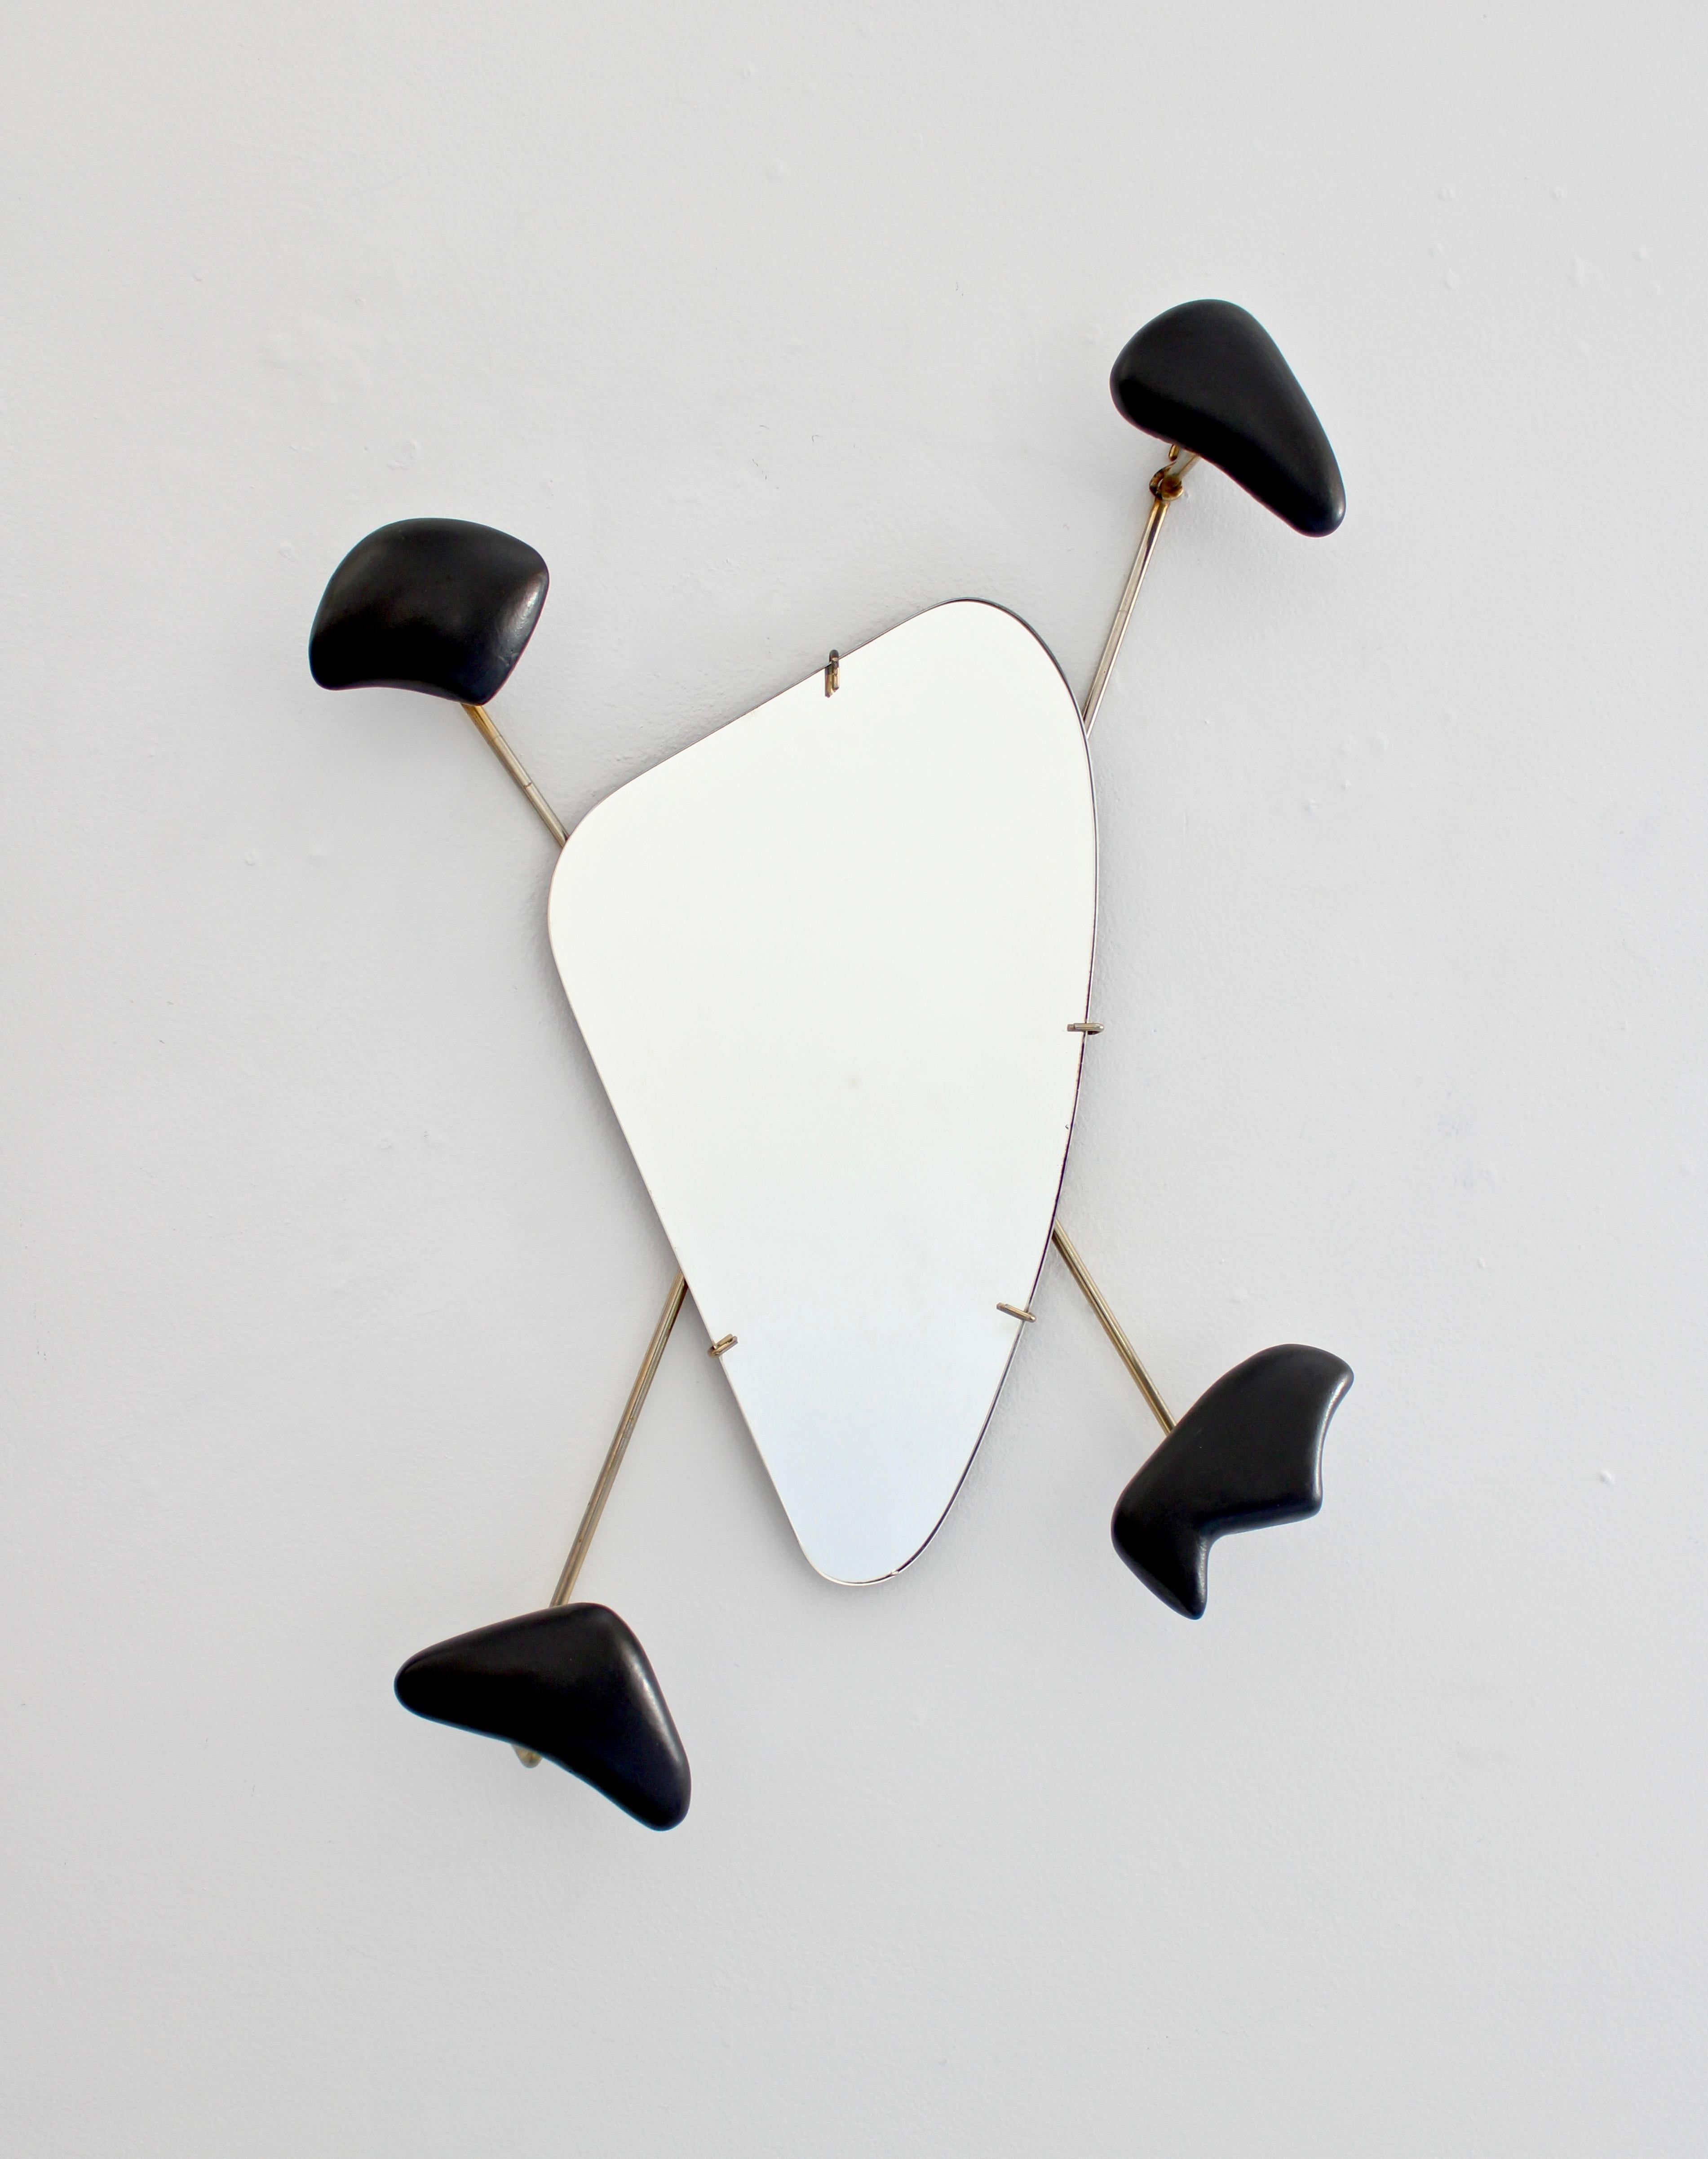 Wall-mounted coat or hat rack with mirror by Georges Jouve for Marcel Asselbur. Asselbur, France, 1955.
Glazed matte black stoneware forms, mirrored glass, with a brass frame.
It can be used as a wall sculpture as well.
Thus Jouve ceramic